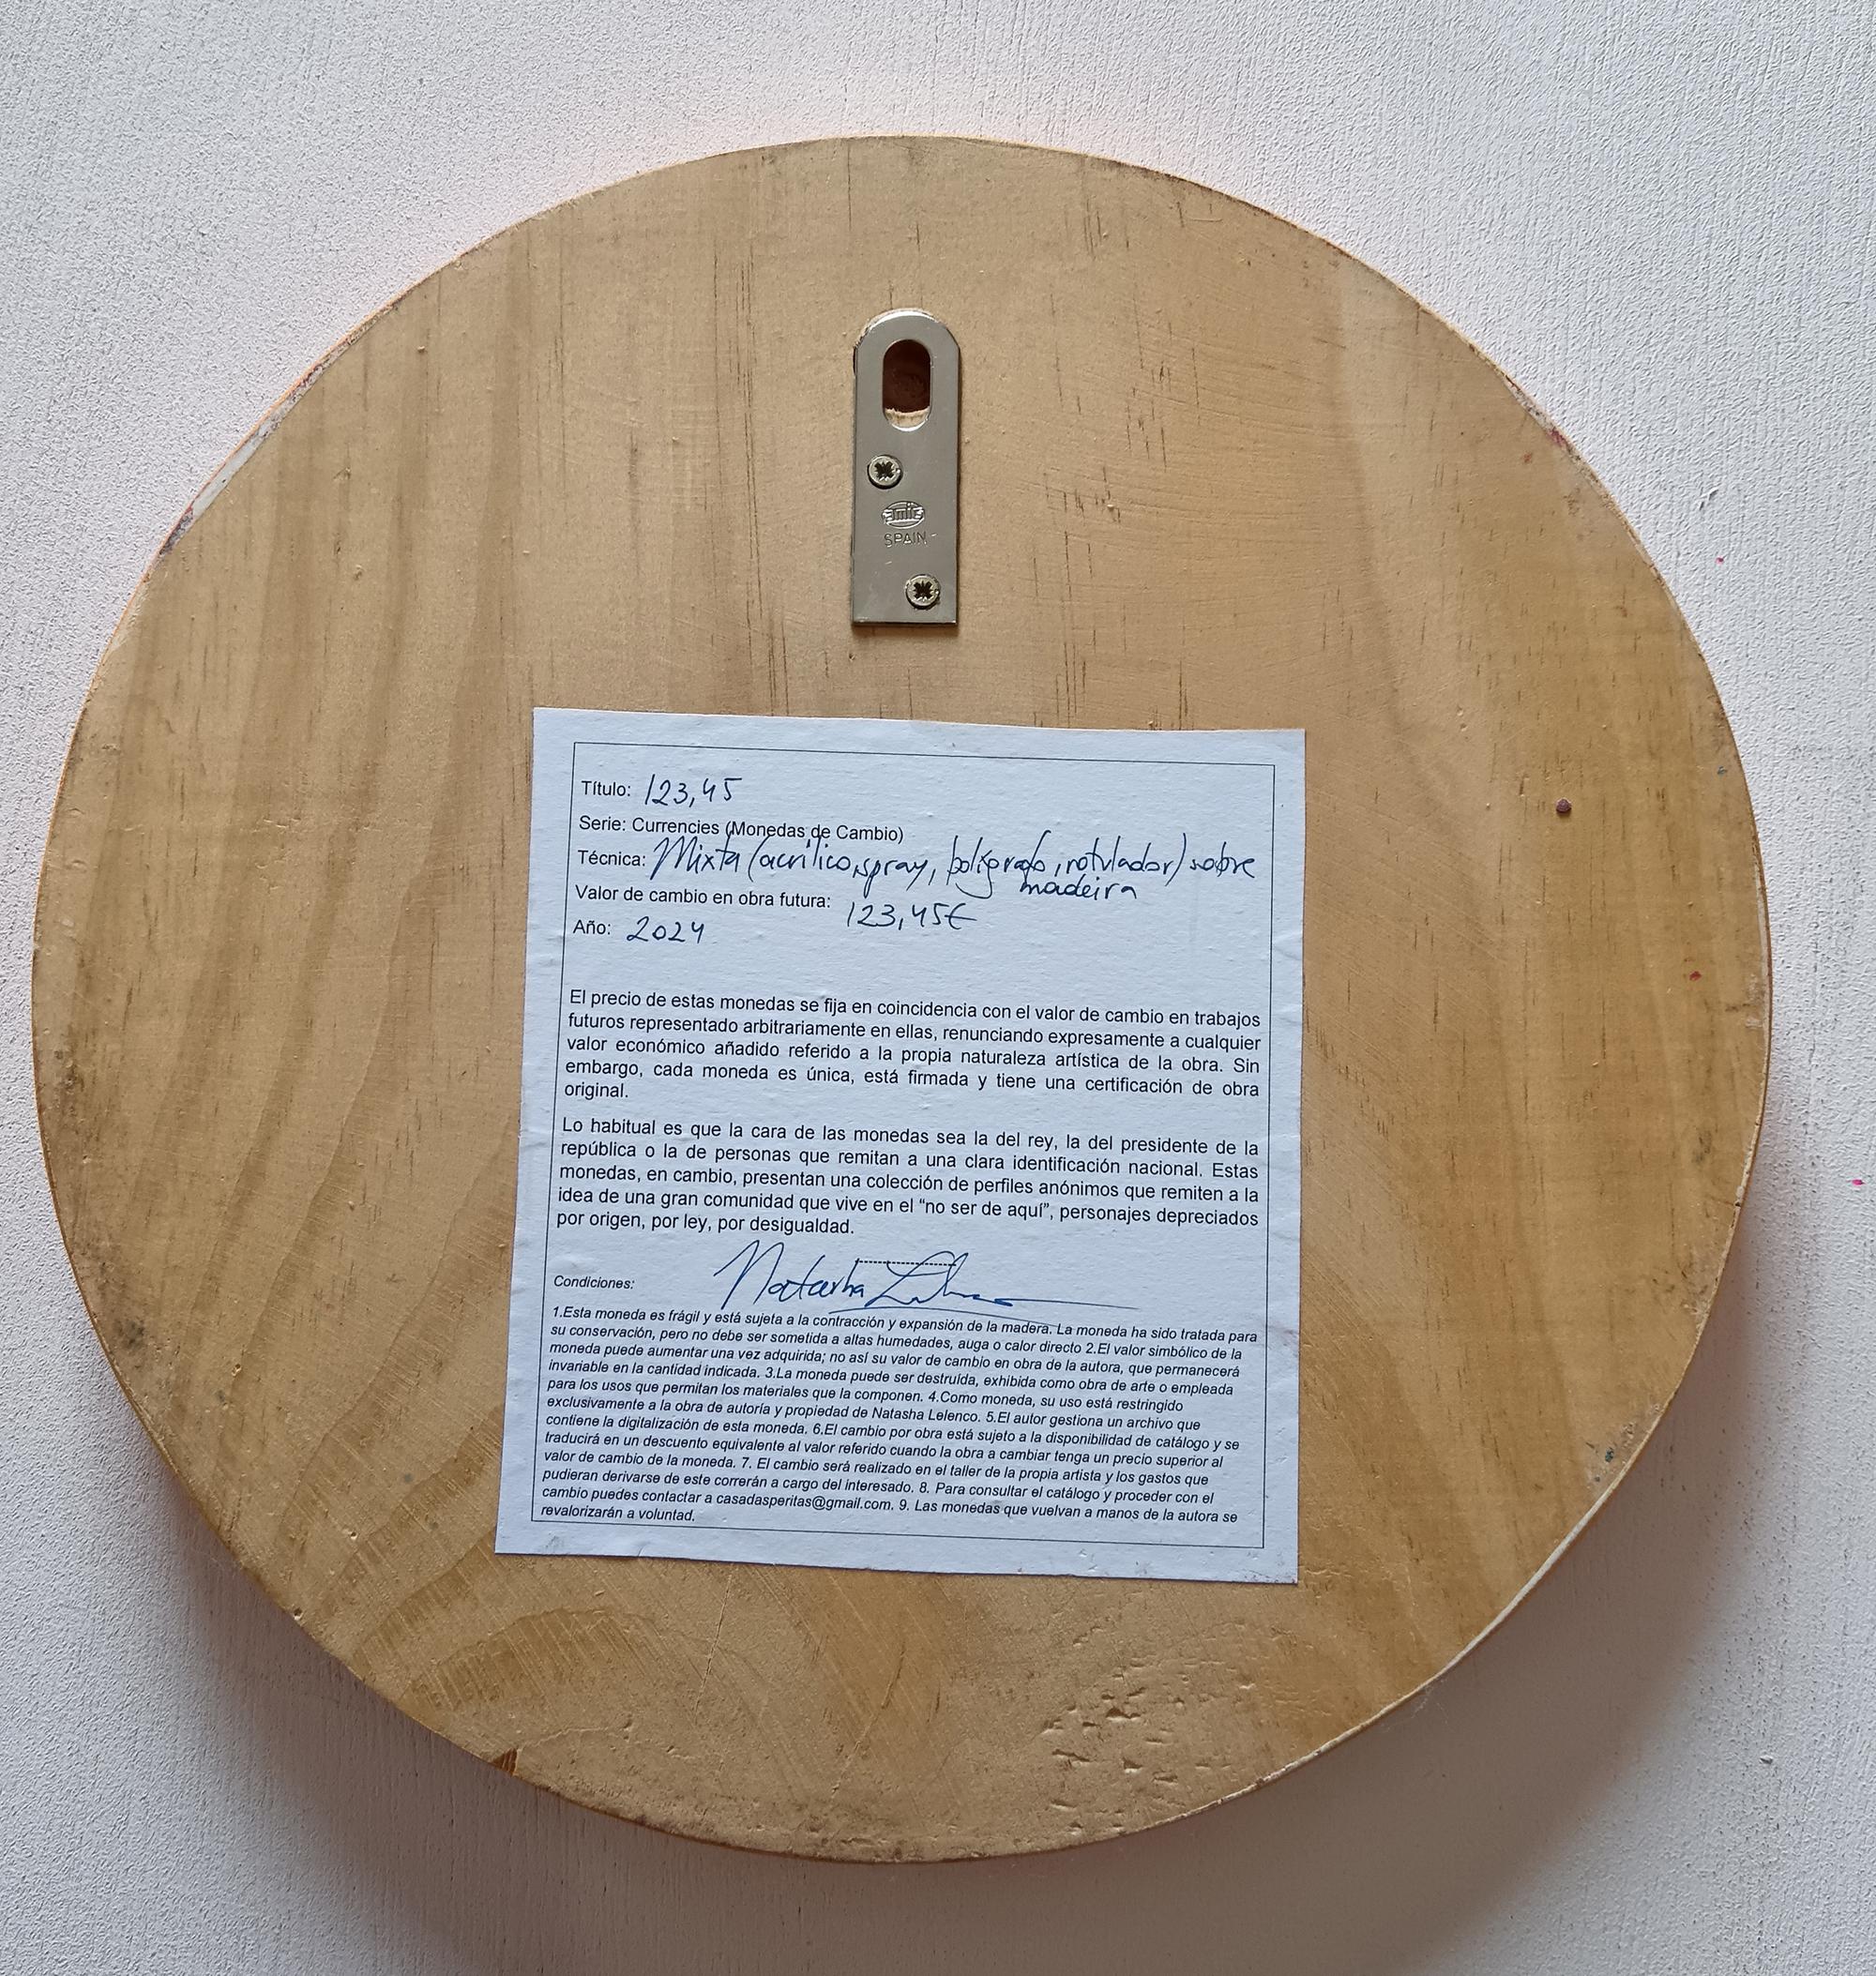 This sculptural painting by Natasha Lelenco, created on a wooden circle with a thickness of two centimeters and a diameter of 26 centimeters, is one of the recent works from the Currency Exchange series. In this case, the piece, rendered in vibrant